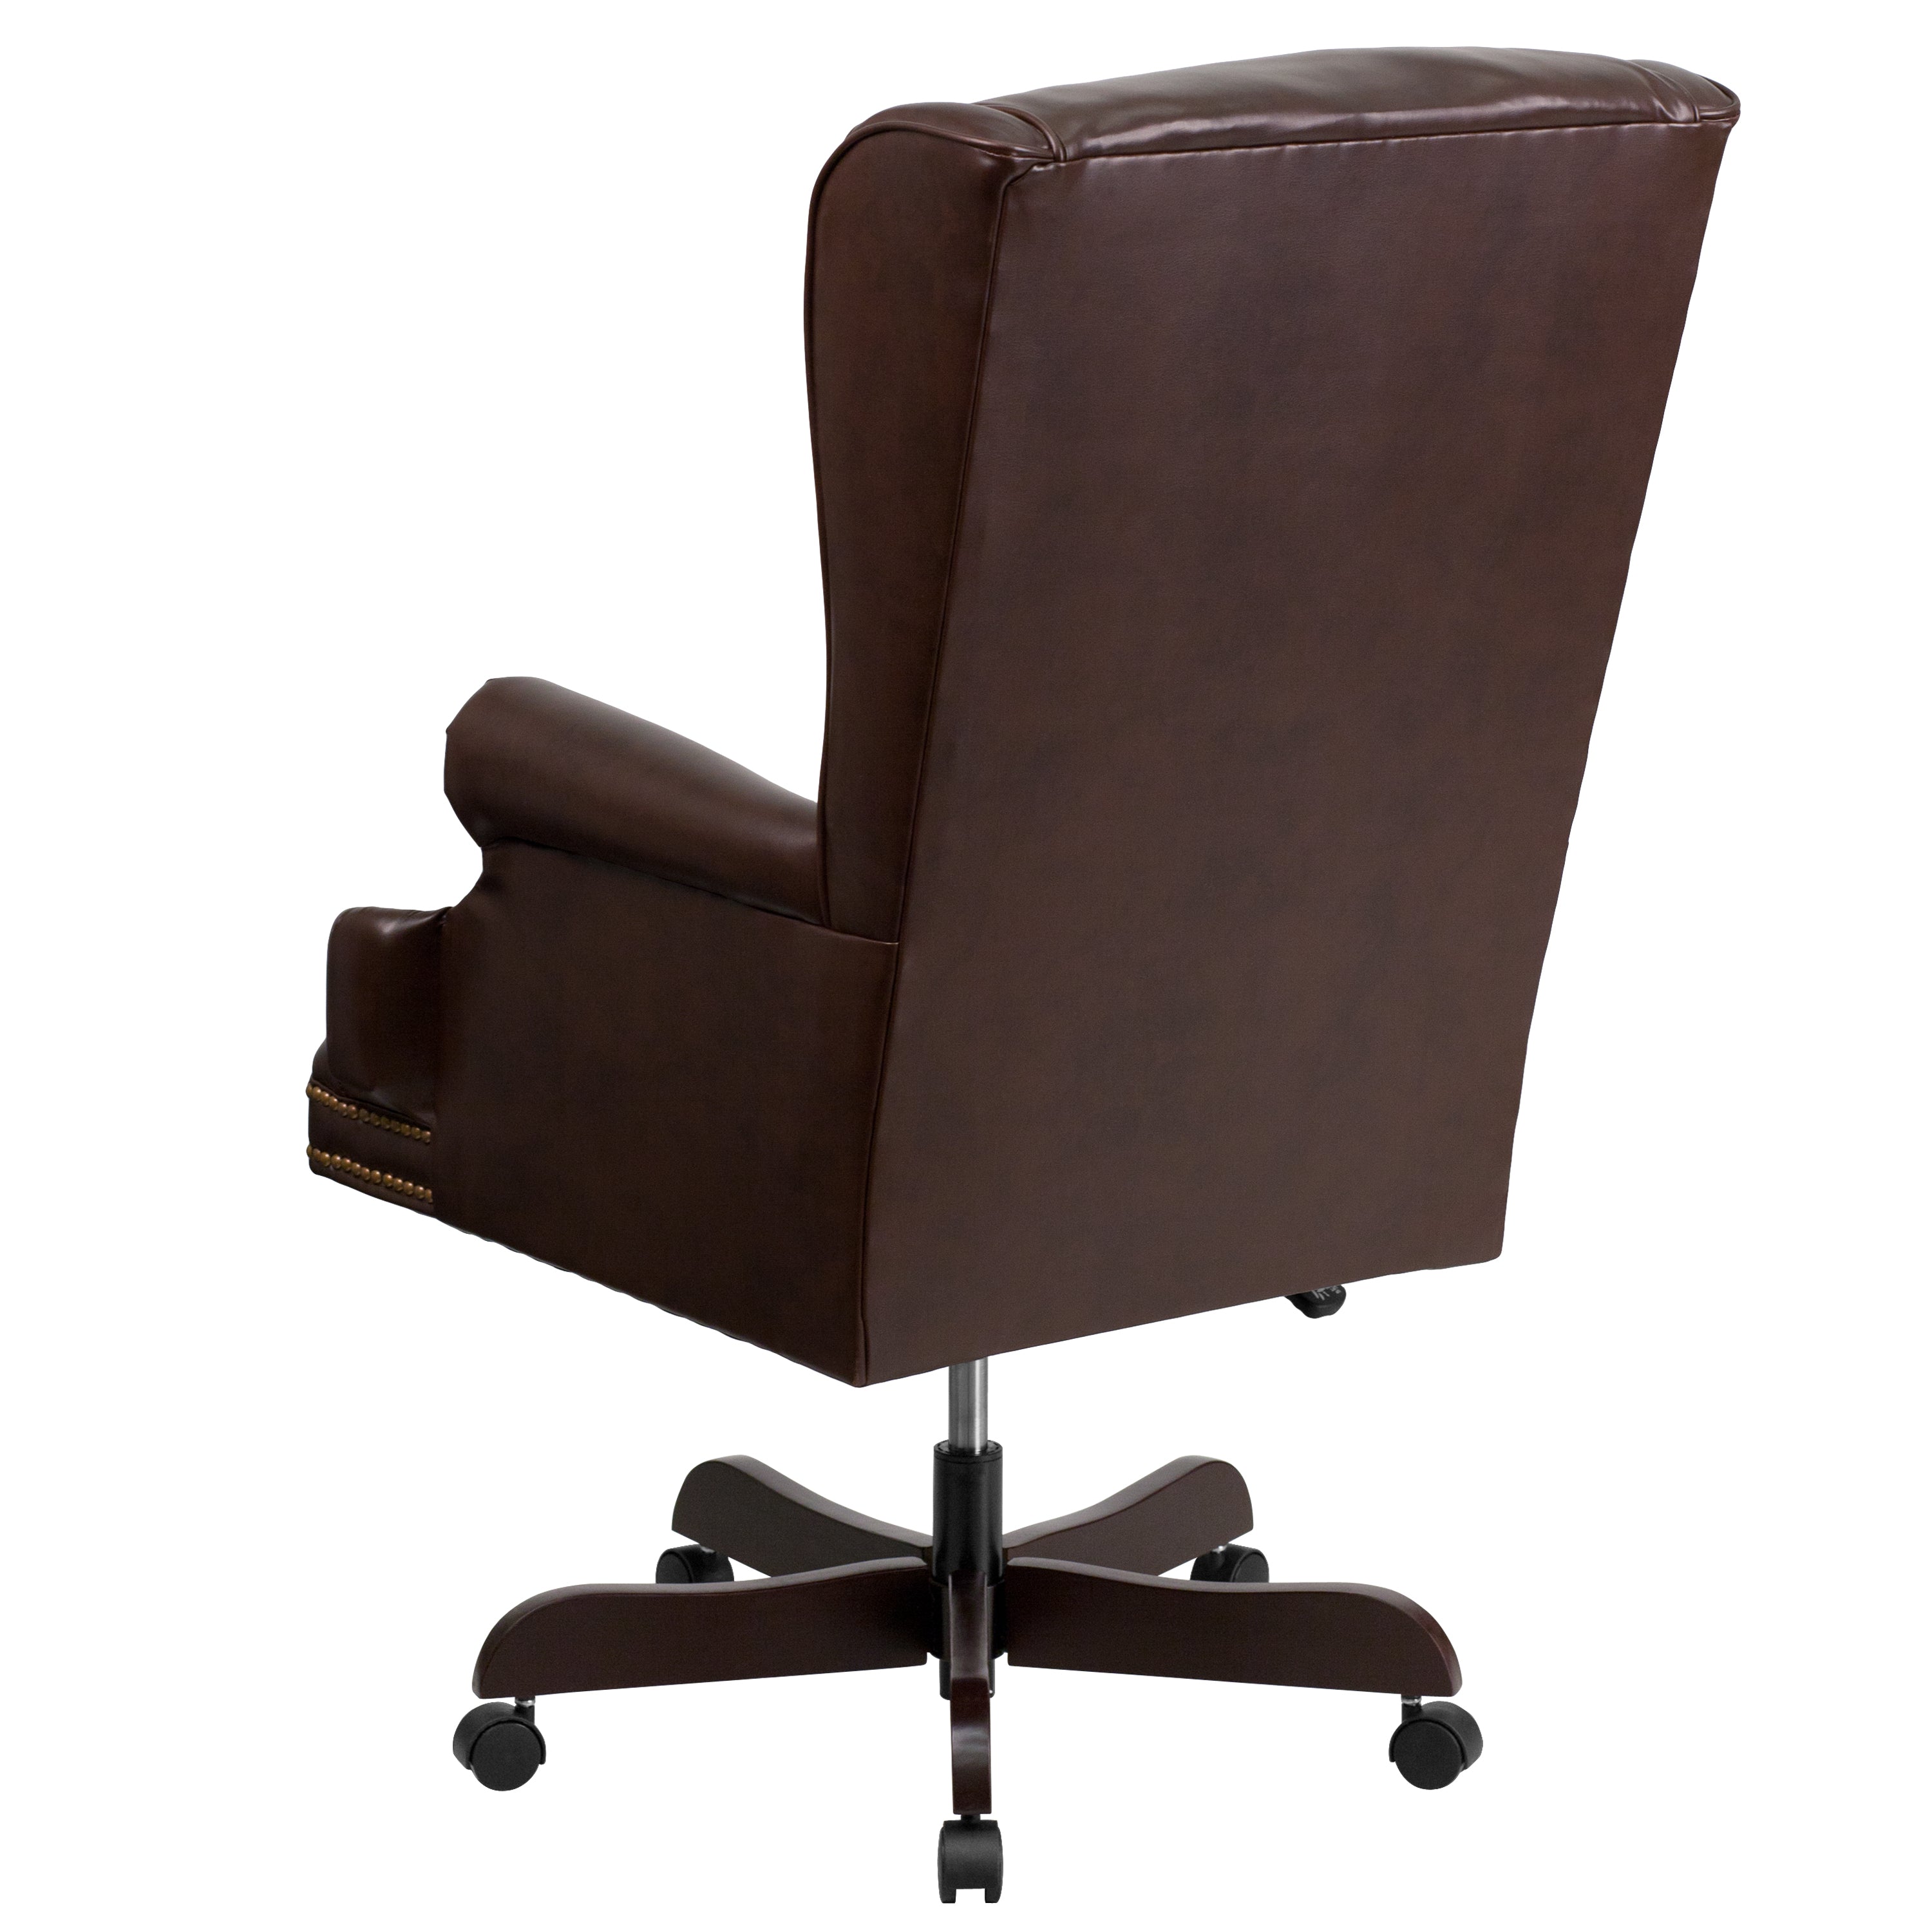 High Back Traditional Tufted LeatherSoft Executive Swivel Ergonomic Office Chair with Oversized Headrest and Nail Trim Arms-Office Chair-Flash Furniture-Wall2Wall Furnishings